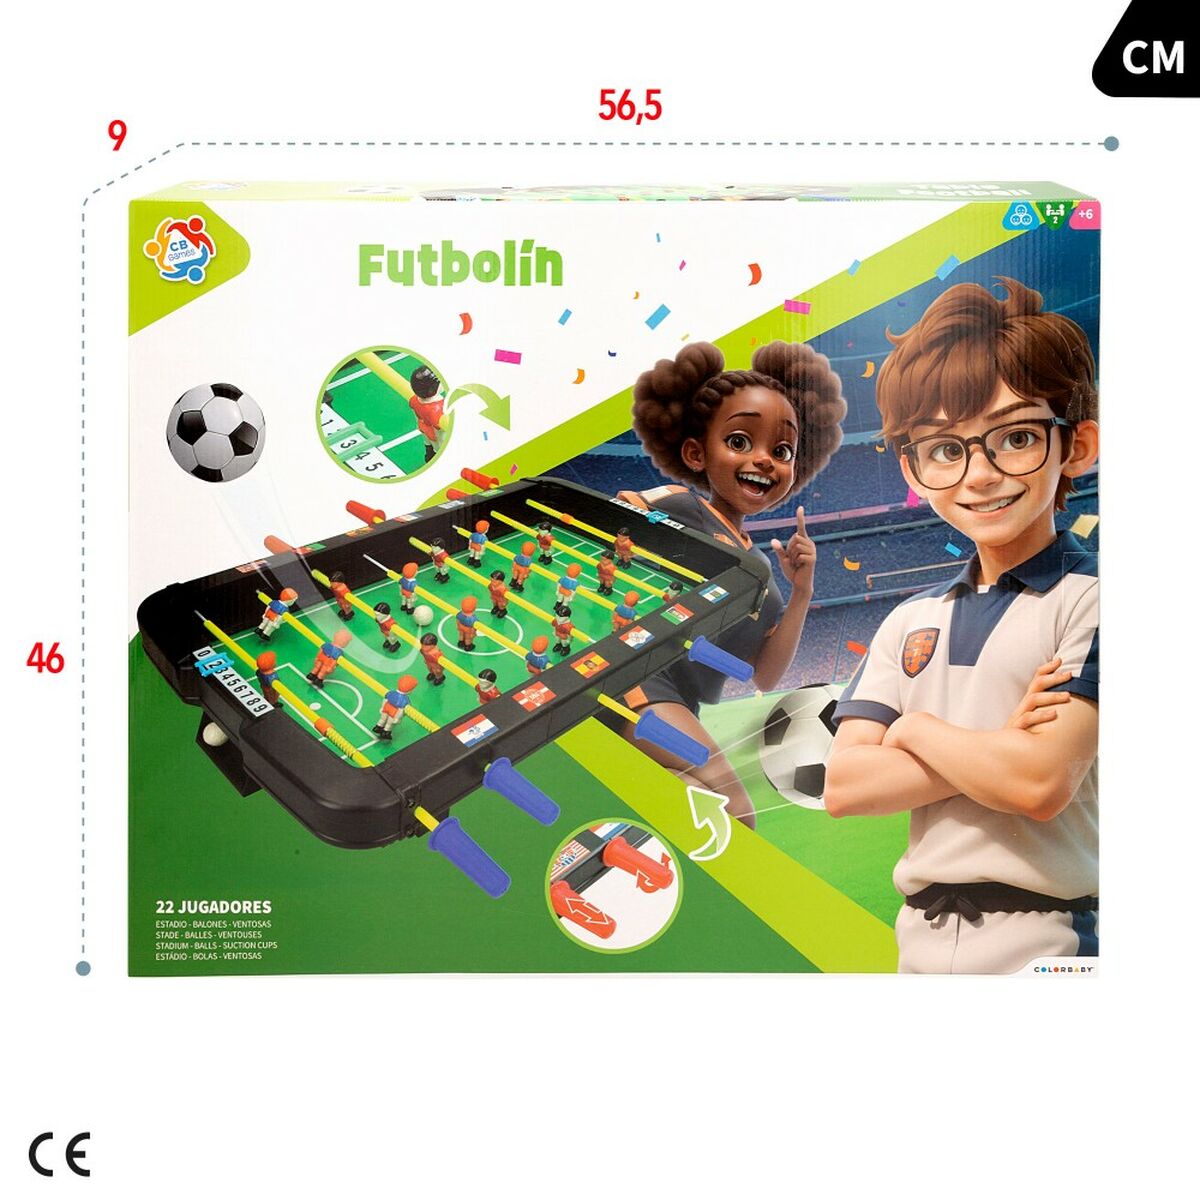 Table-top football Colorbaby 45 x 8 x 55 cm (2 Units)